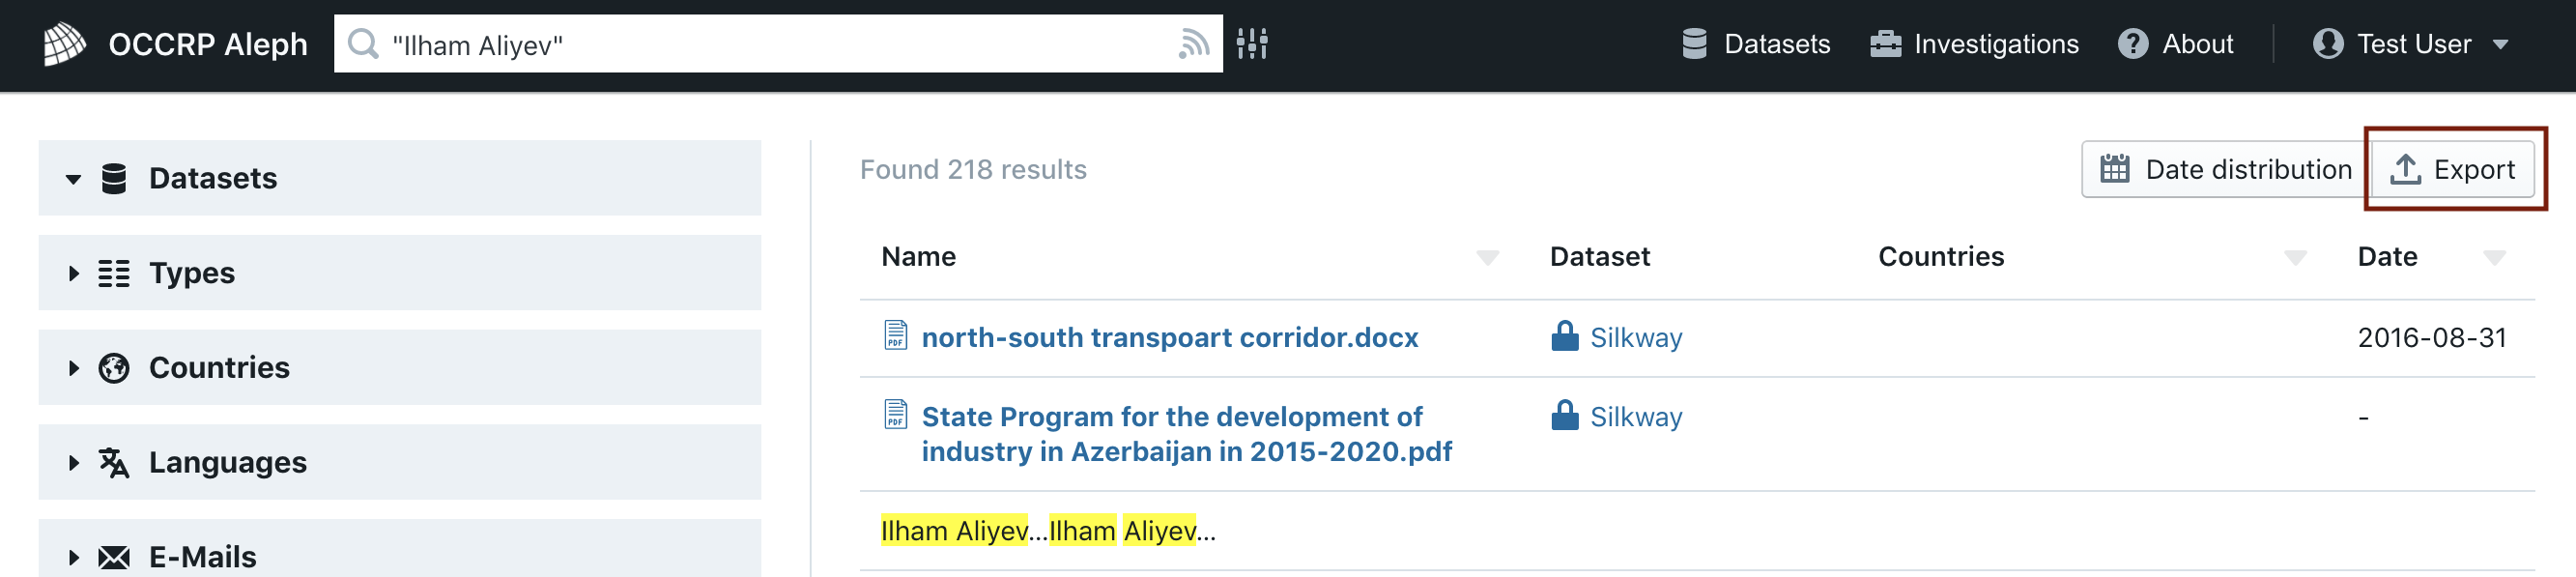 A screenshot of the search results page in Aleph. Above the list of search results, there is a button labeled “Export”. A red marker highlights the button.